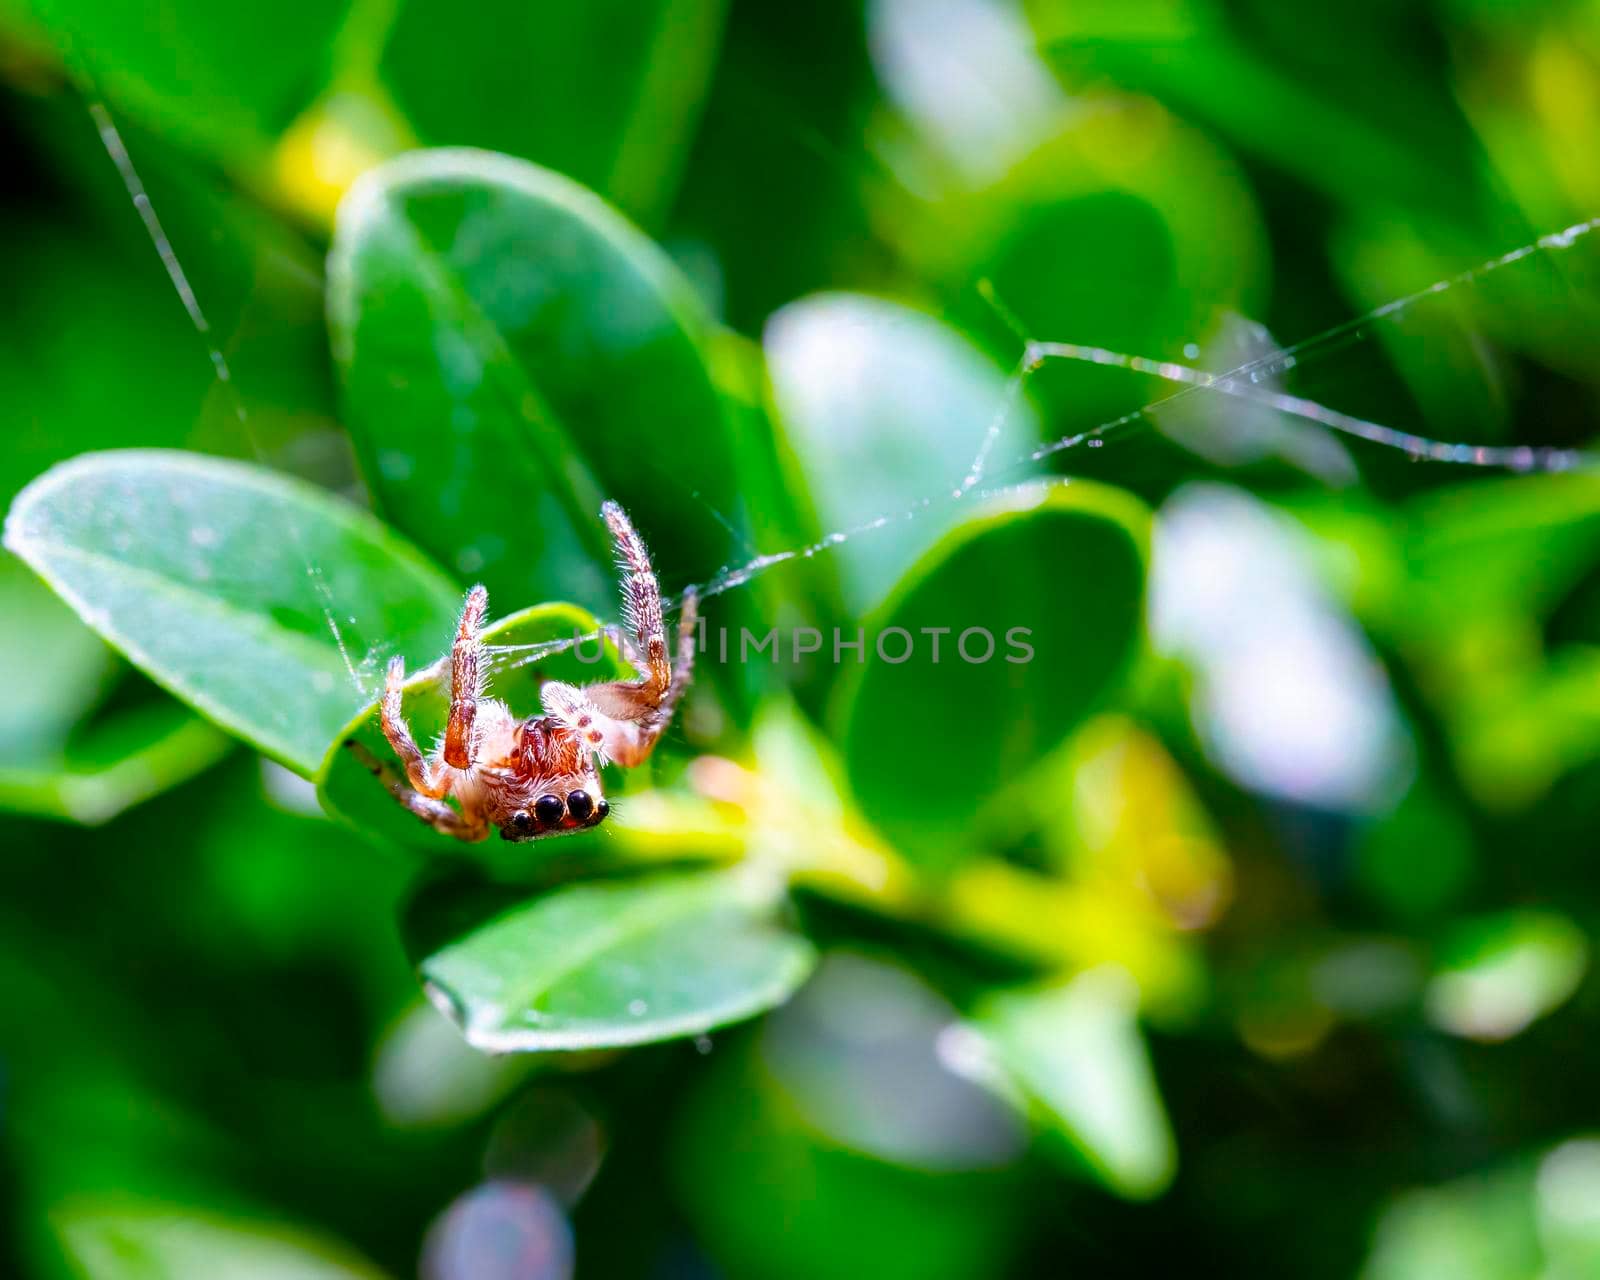 Eight-eyed Jumping Spider Hanging on Web by CharlieFloyd